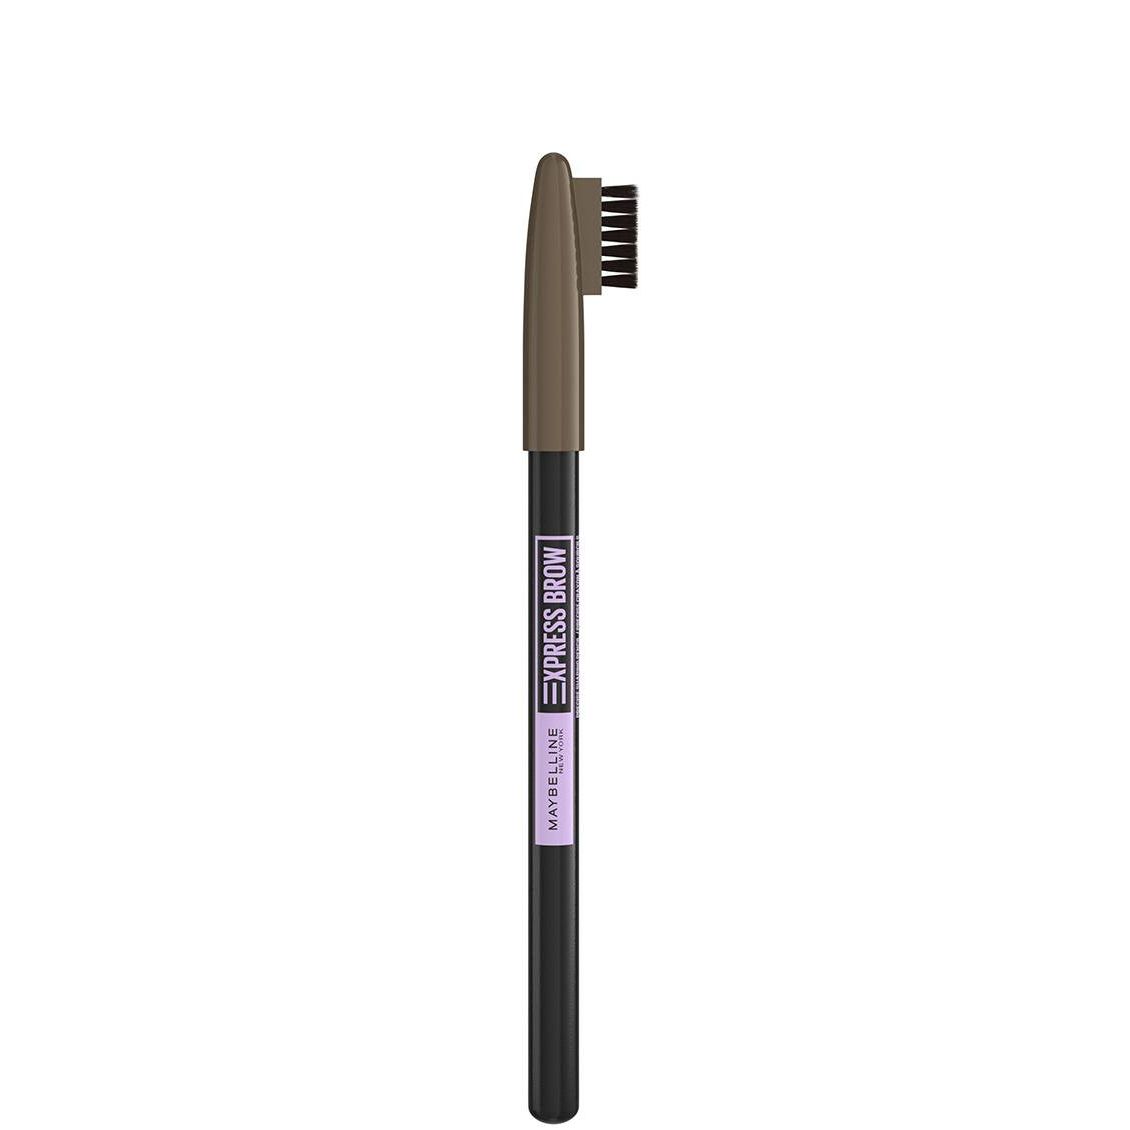 Eyeliner-Stift - Express Brow Precise Shaping Pencil